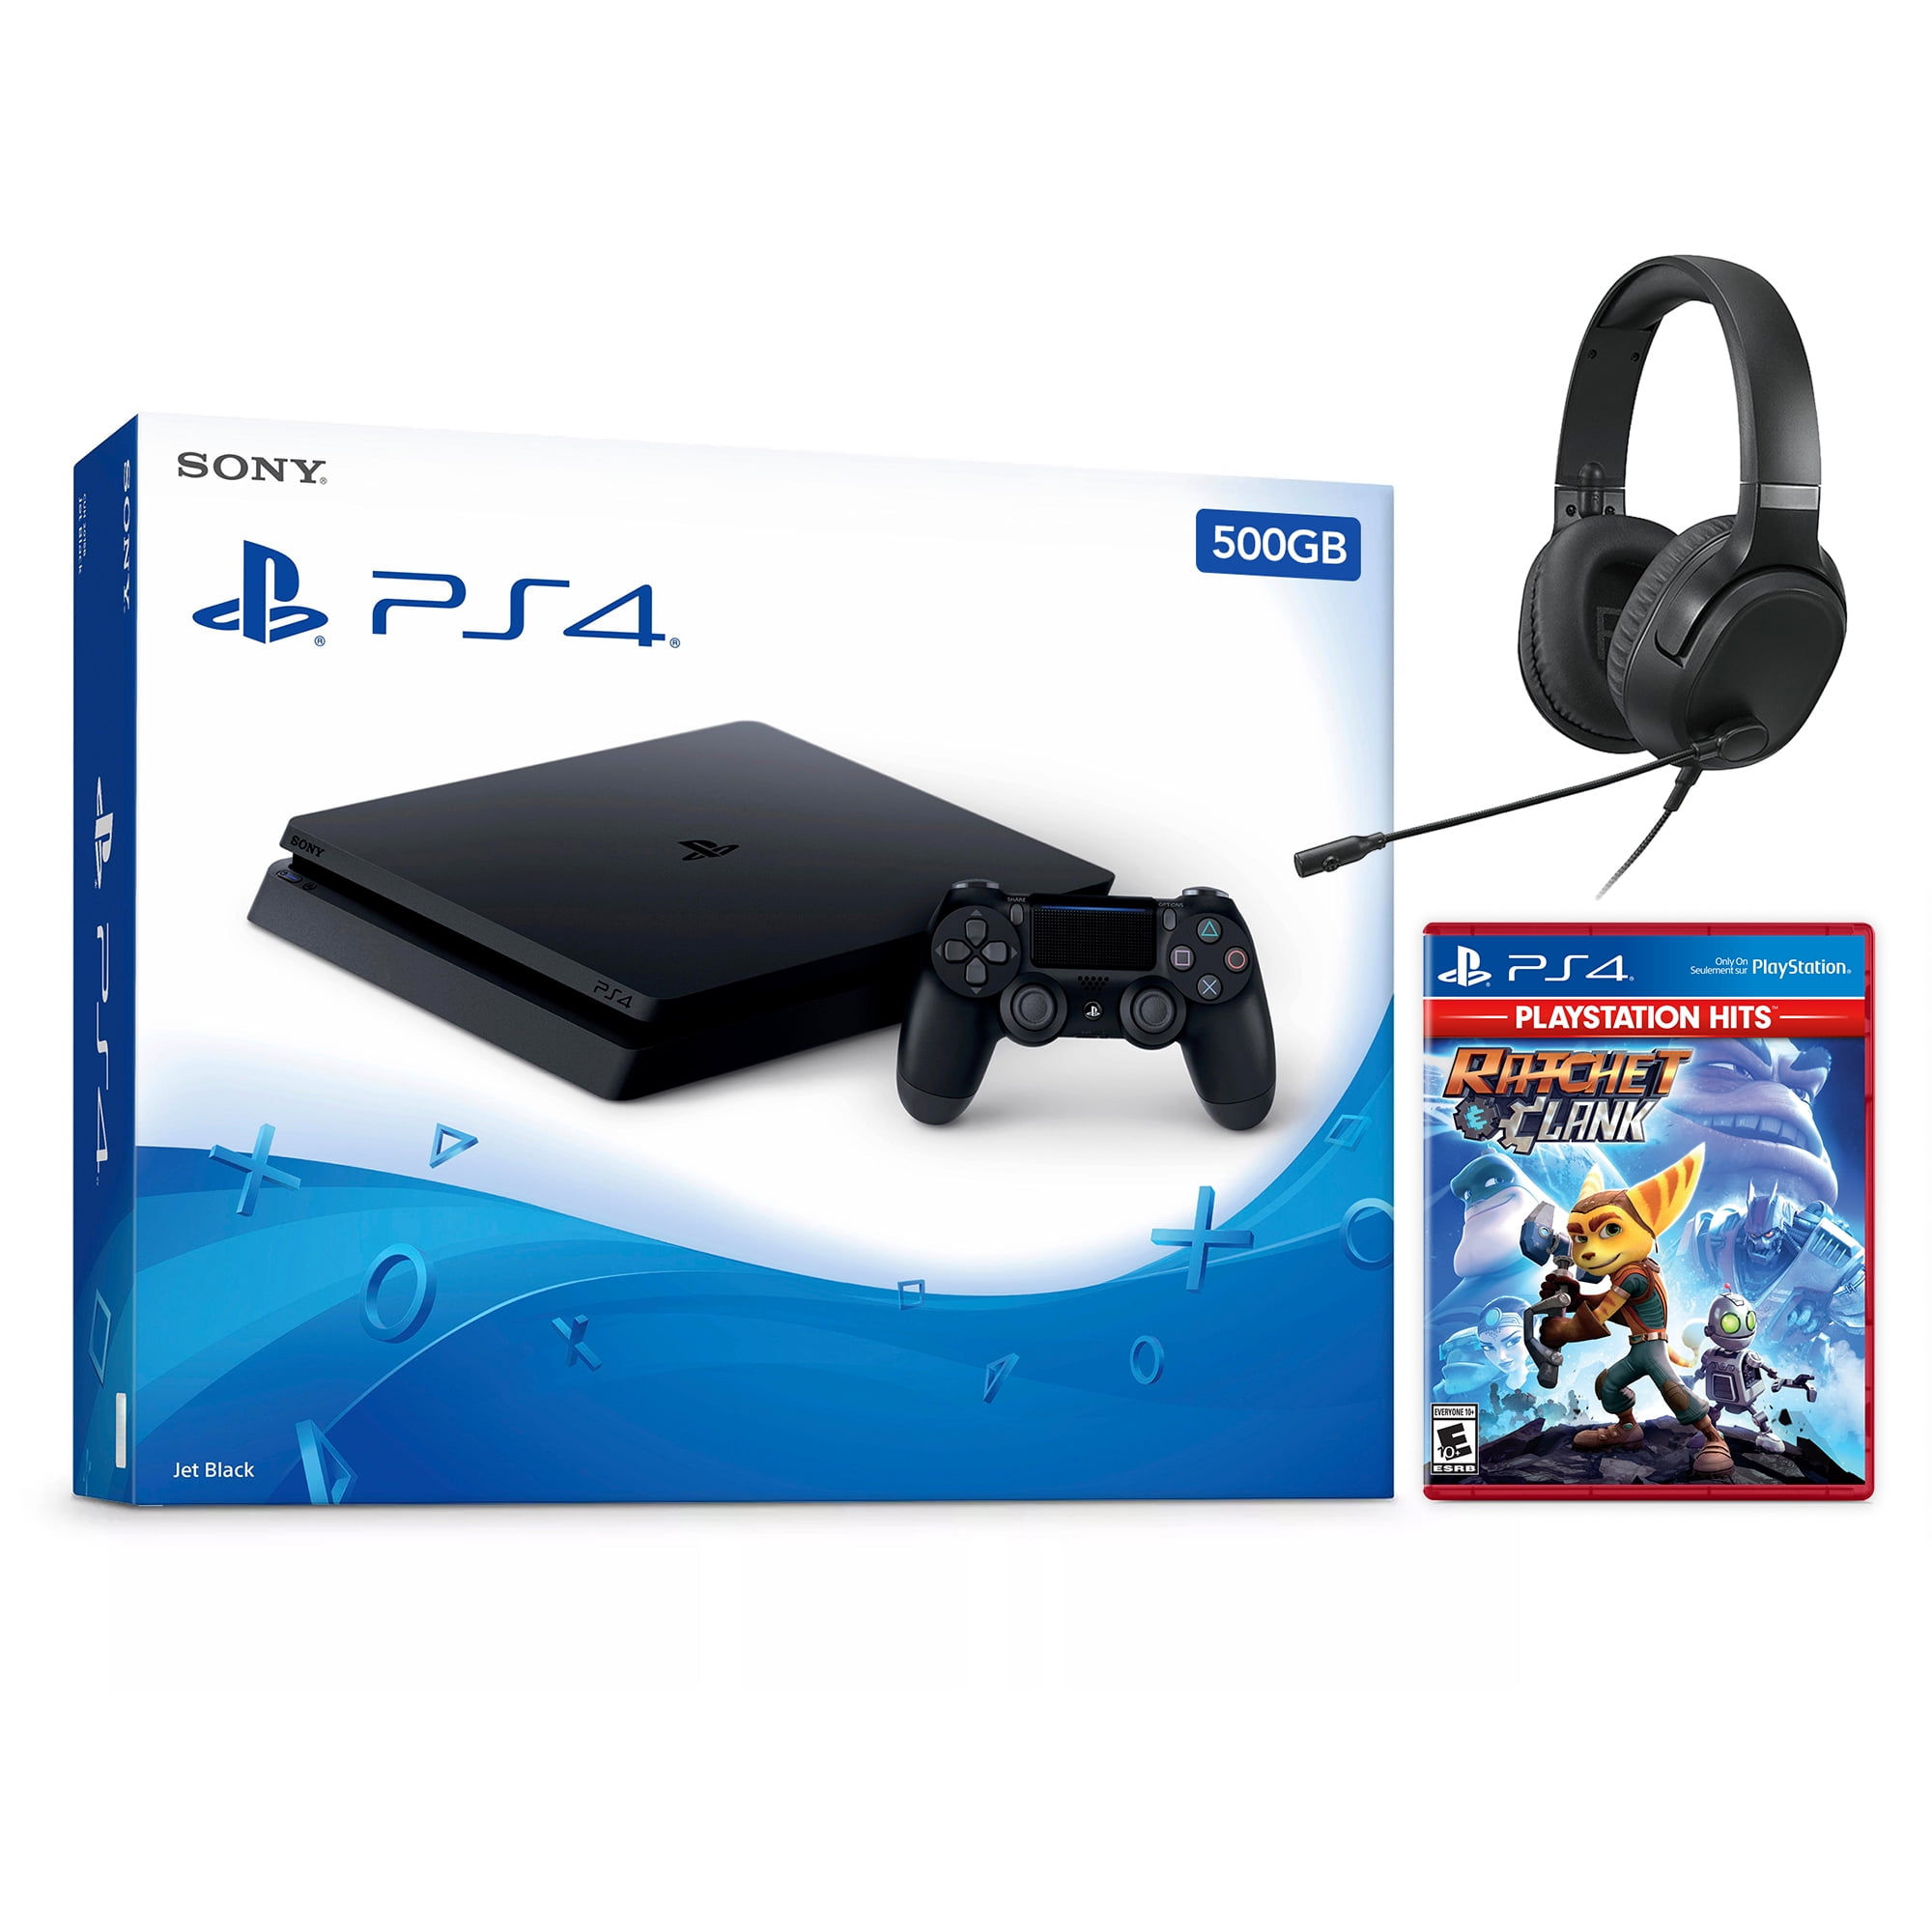 Sony PlayStation 4 Slim 500GB PS4 Gaming Console, Jet Black, with Mytrix Chat Headset